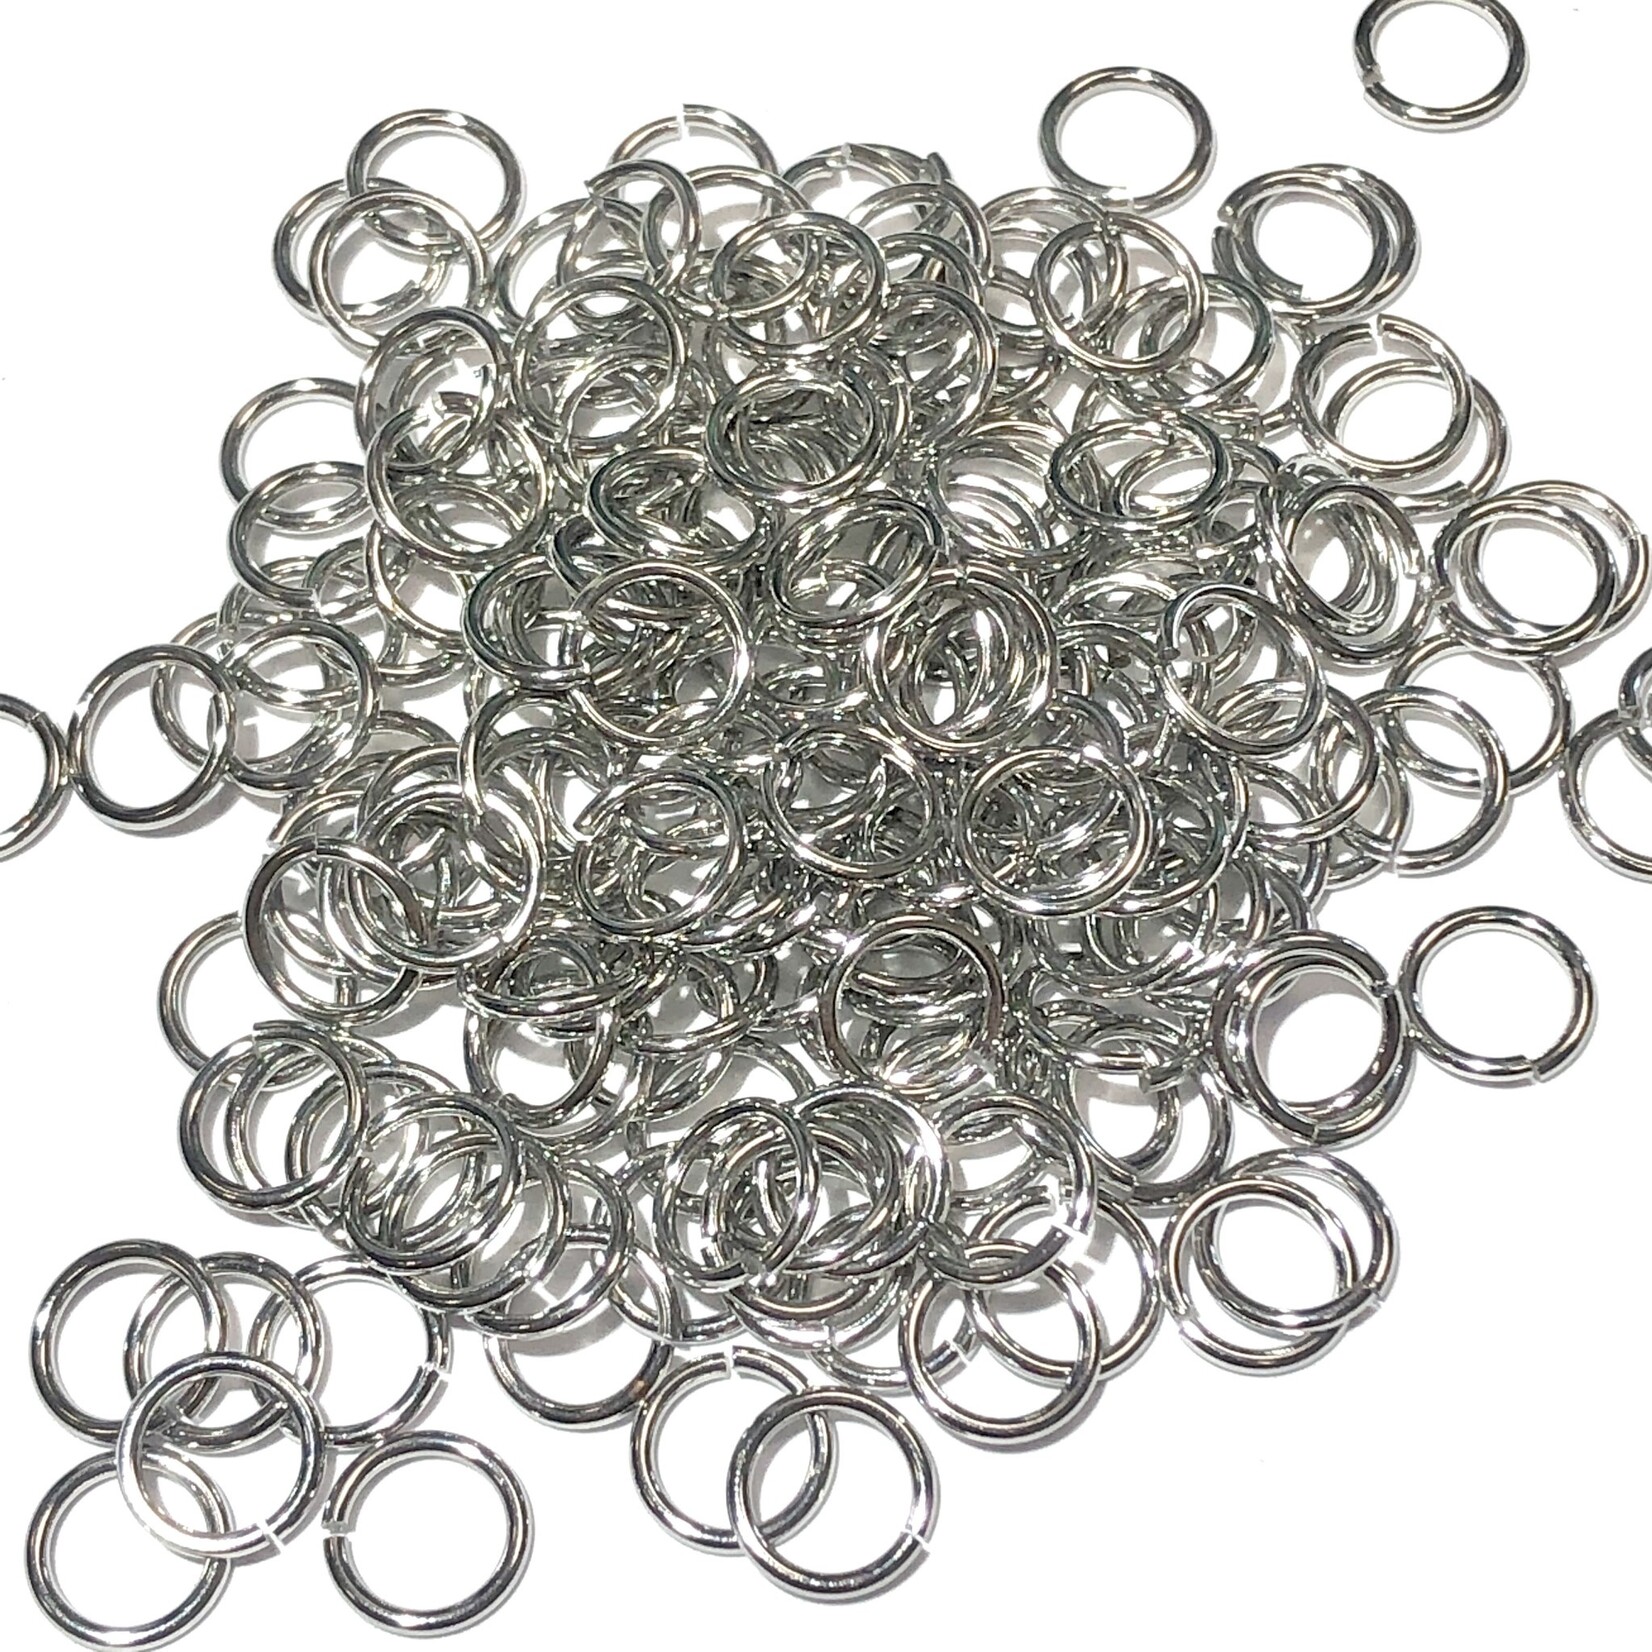 Stainless Steel 18Ga SWG Jump Rings 8x1mm 100pcs